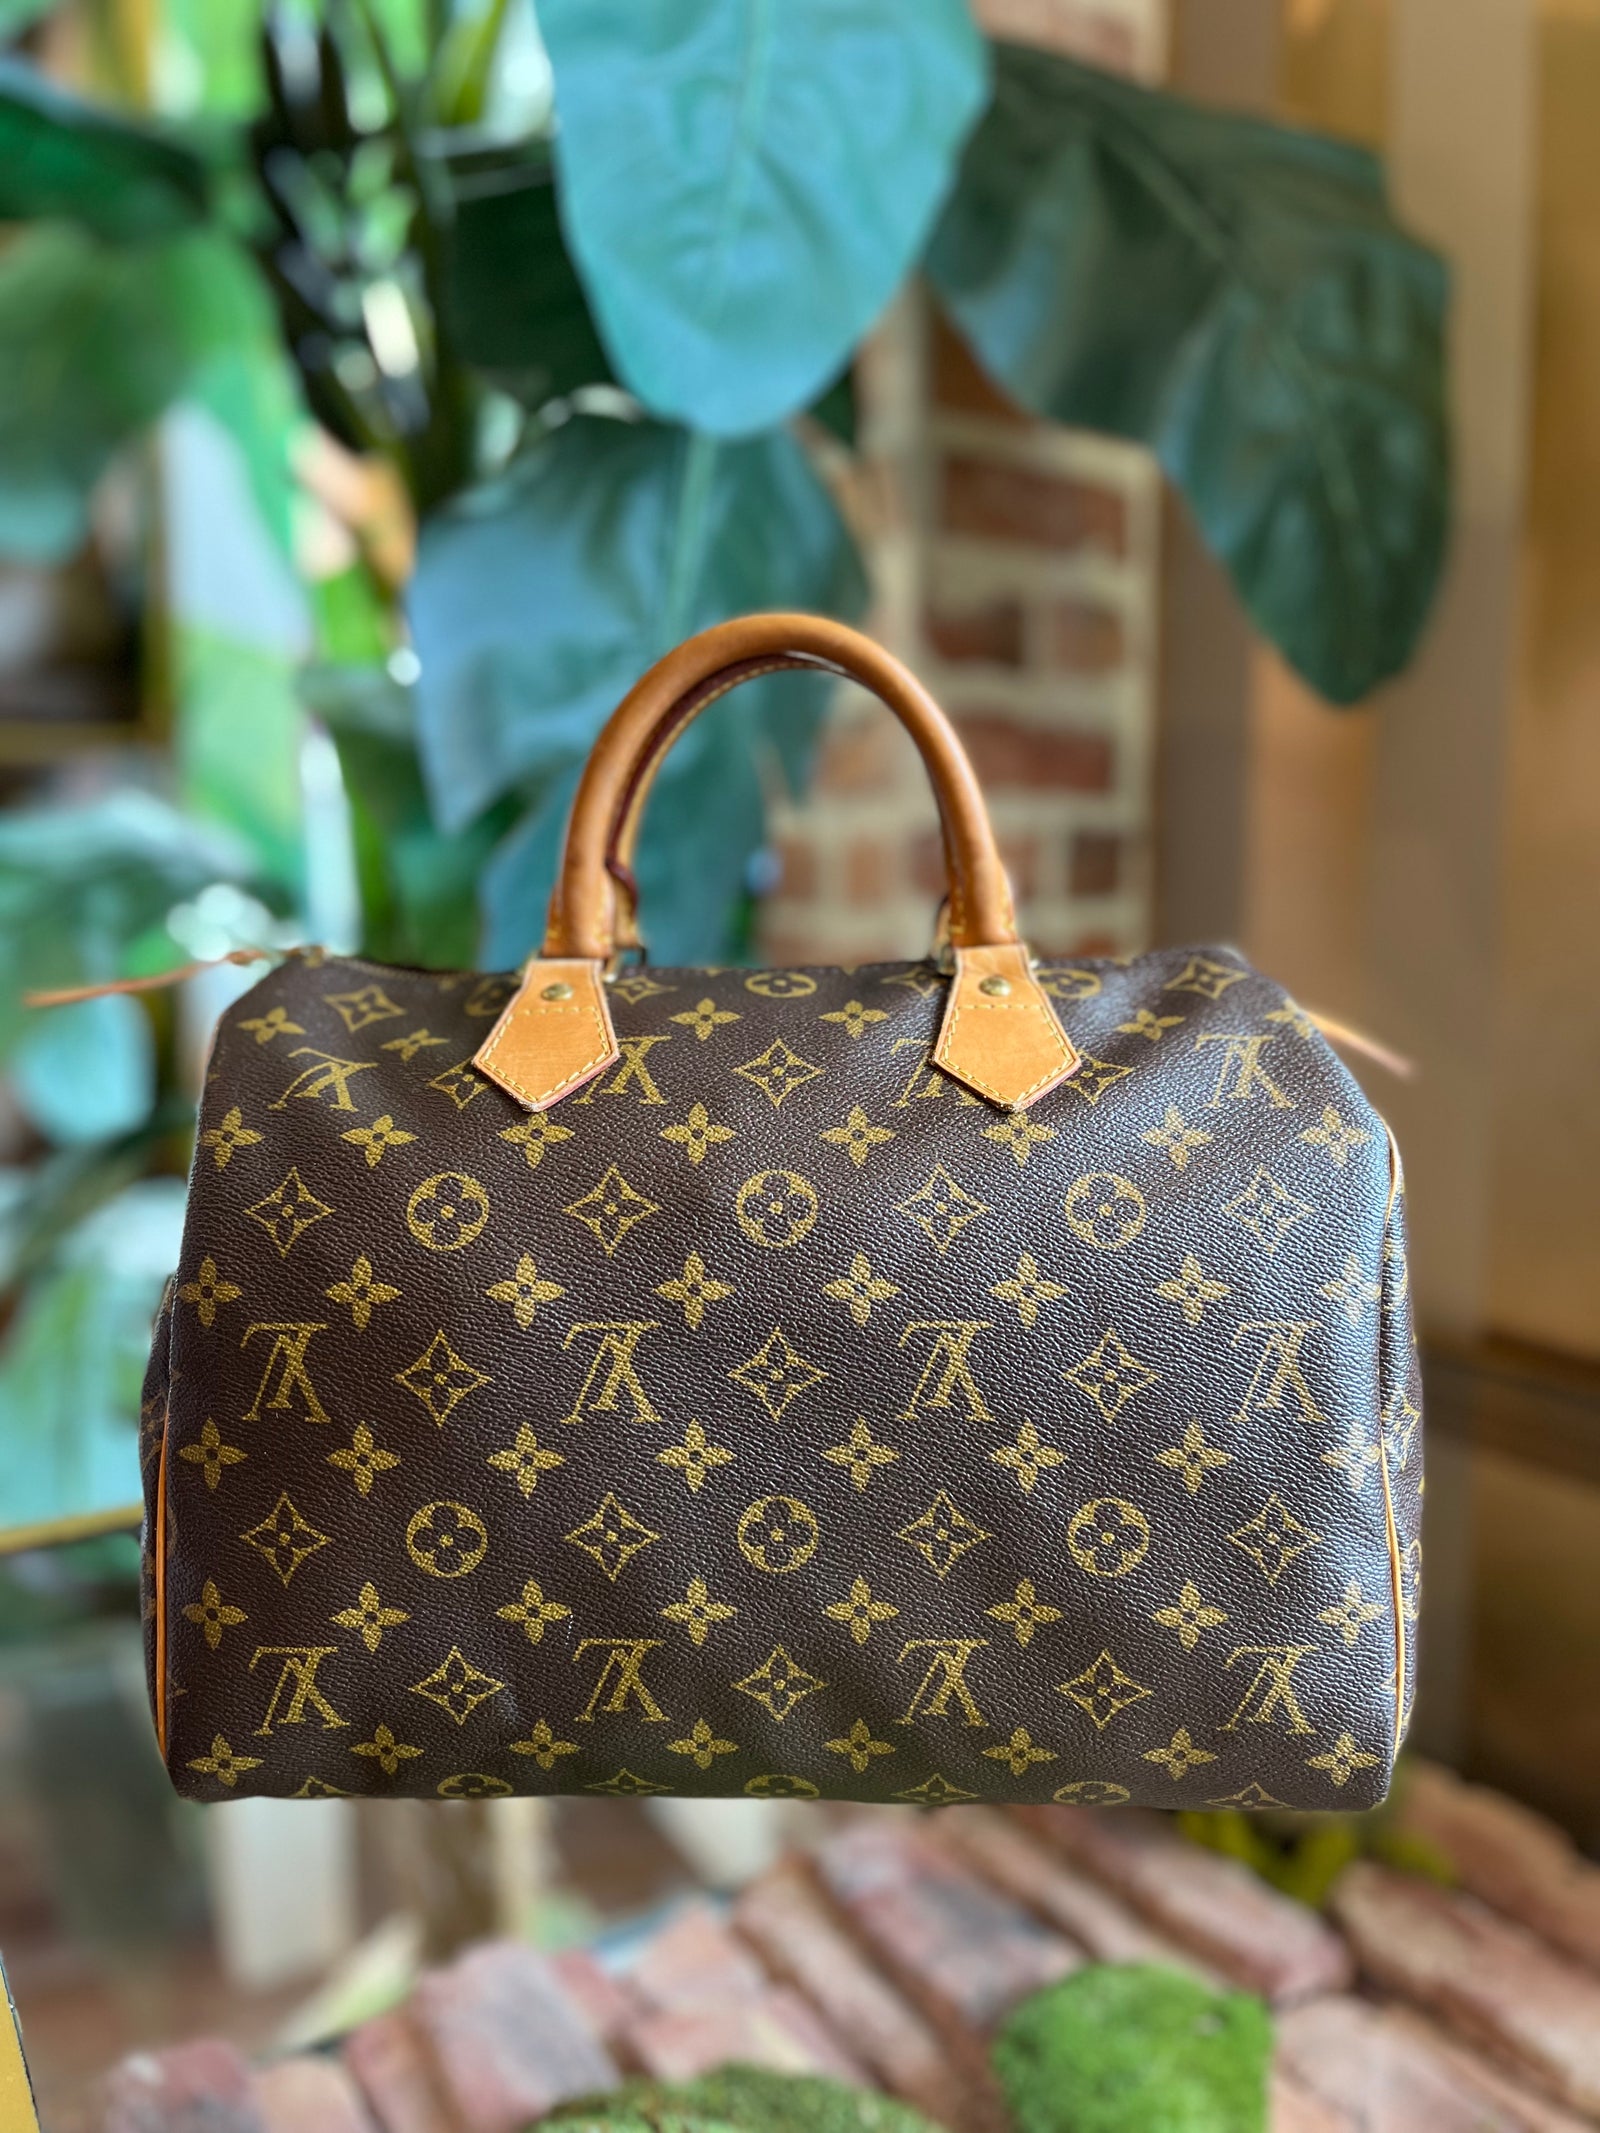 Style or senselessness? Would you buy this pre-owned Louis Vuitton handbag  with giant holes in it for $11,900? - Luxurylaunches